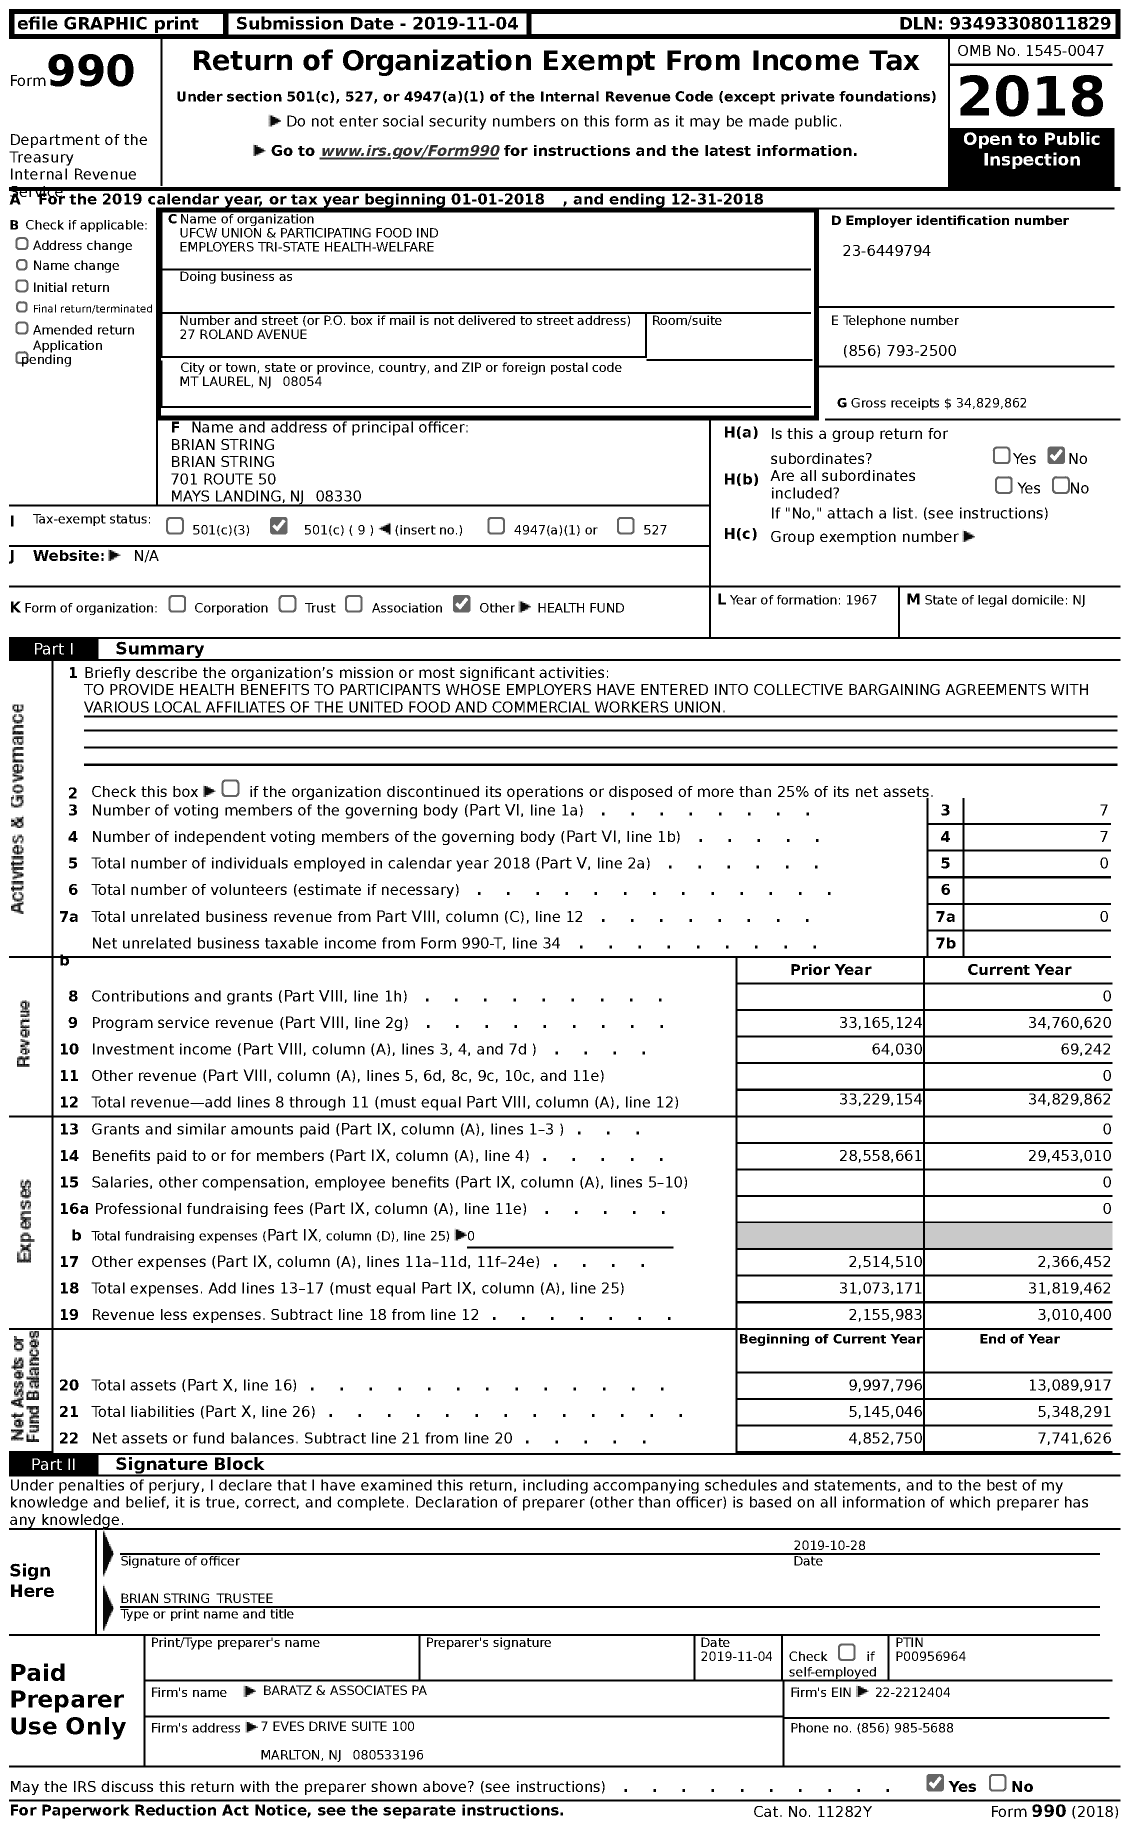 Image of first page of 2018 Form 990 for Ufcw Union and Participating Food Ind Employers Tri-State Health-Welfare